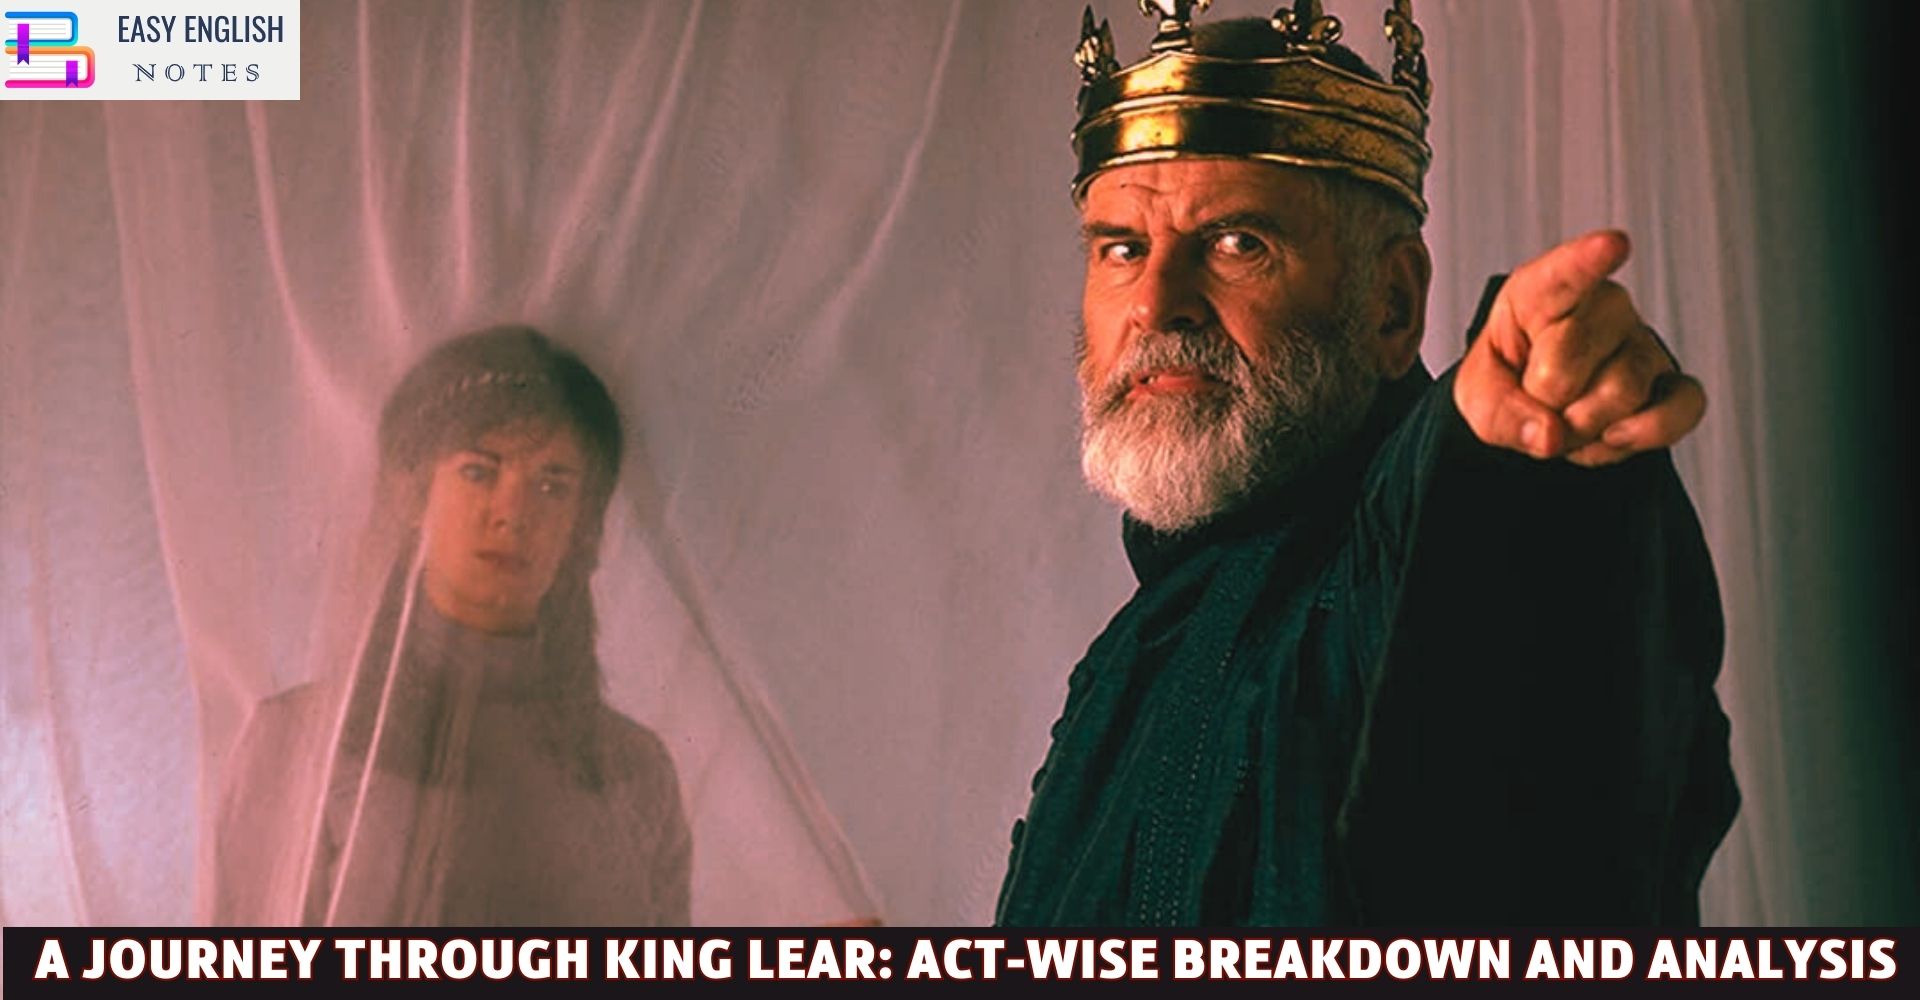 A Journey Through King Lear: Act-wise Breakdown and Analysis